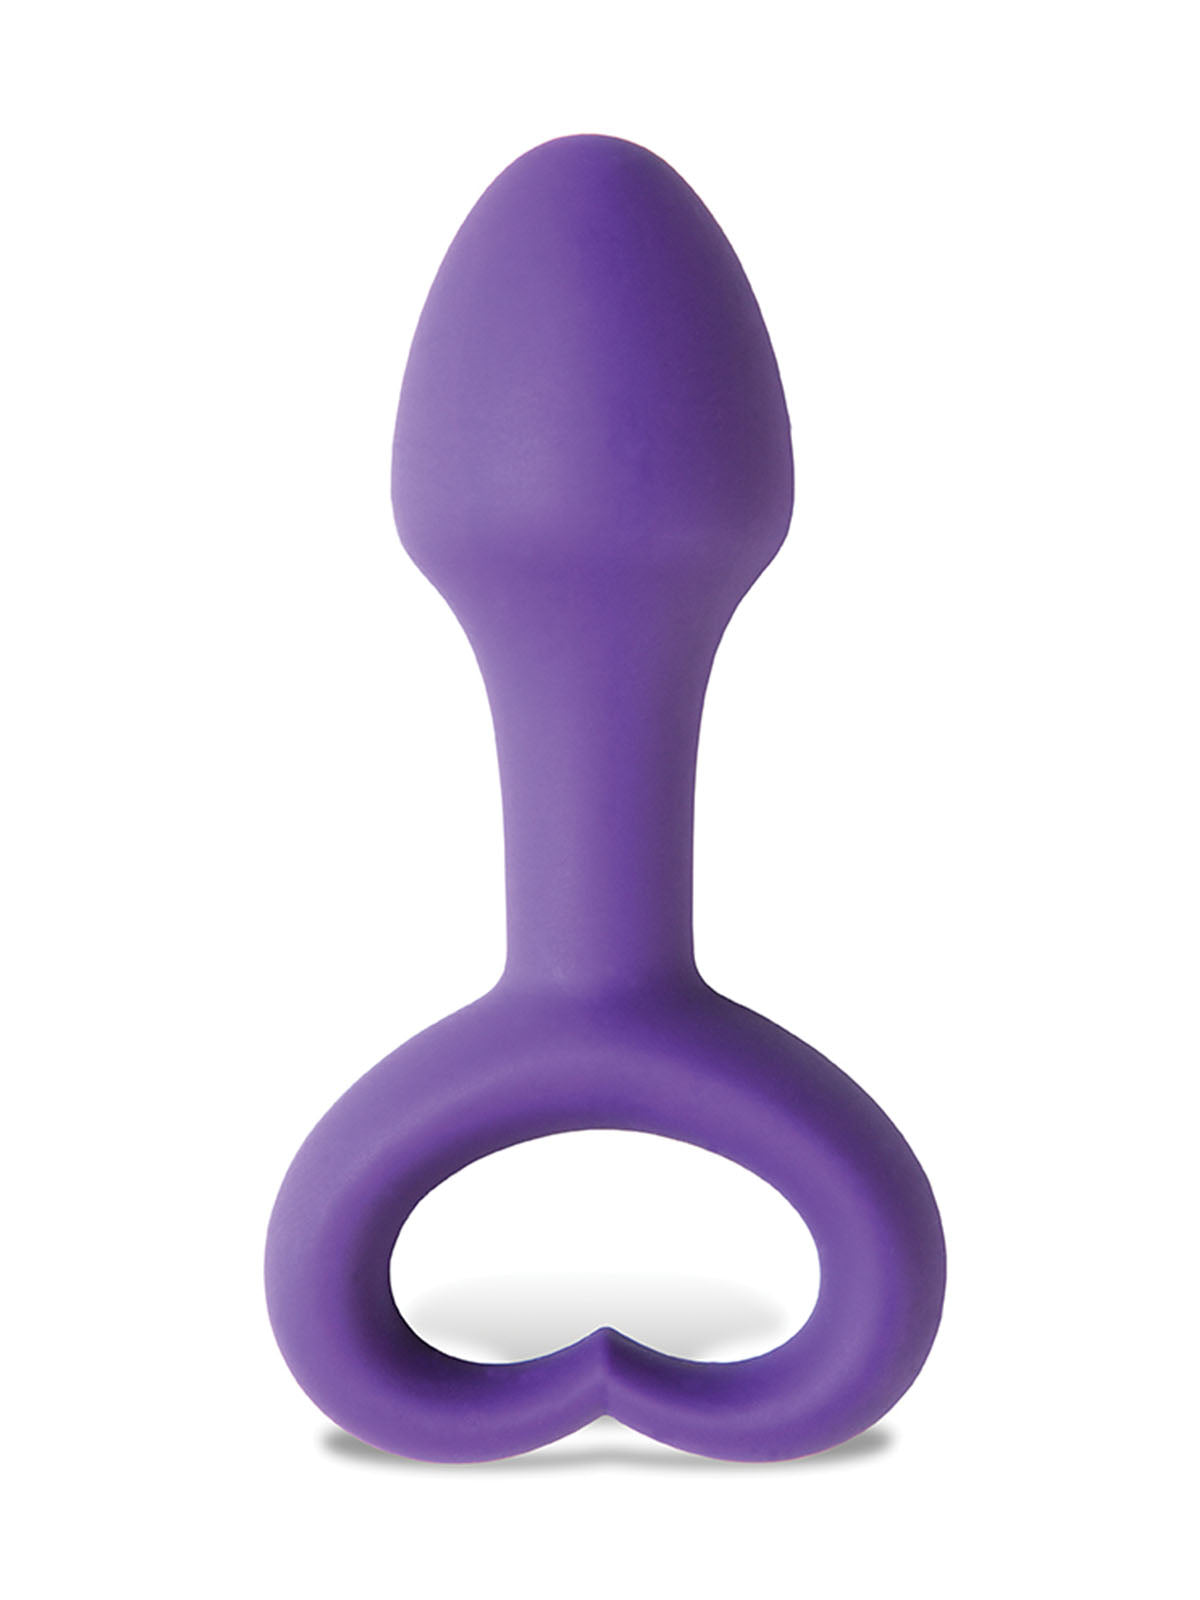 LoveLife Explore Silicone Butt Plug by OhMiBod